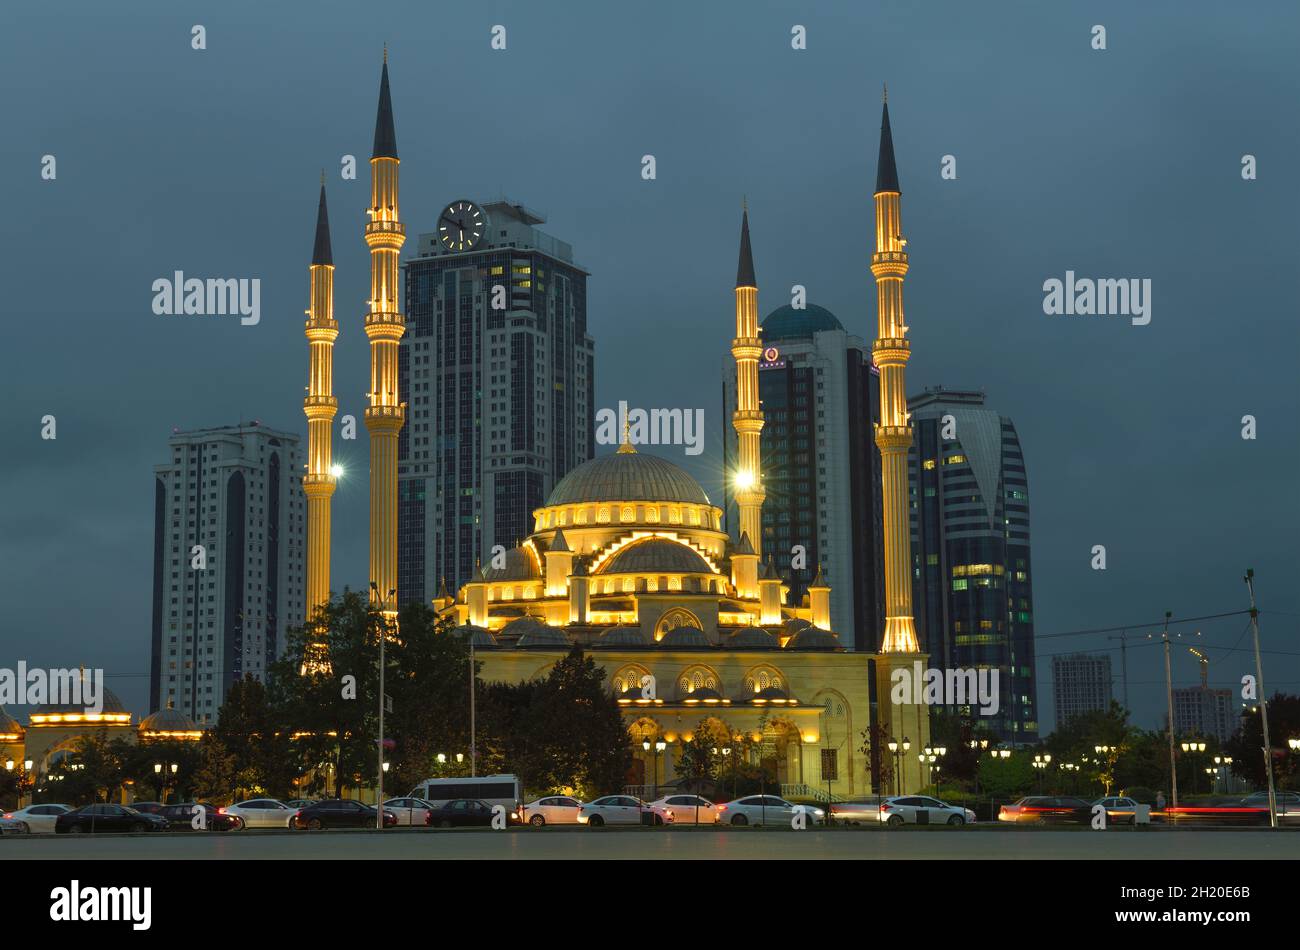 GROZNY, RUSSIA - SEPTEMBER 29, 2021: Mosque 'Heart of Chechnya' in front of the high-rise complex 'Grozny City' on a September evening Stock Photo